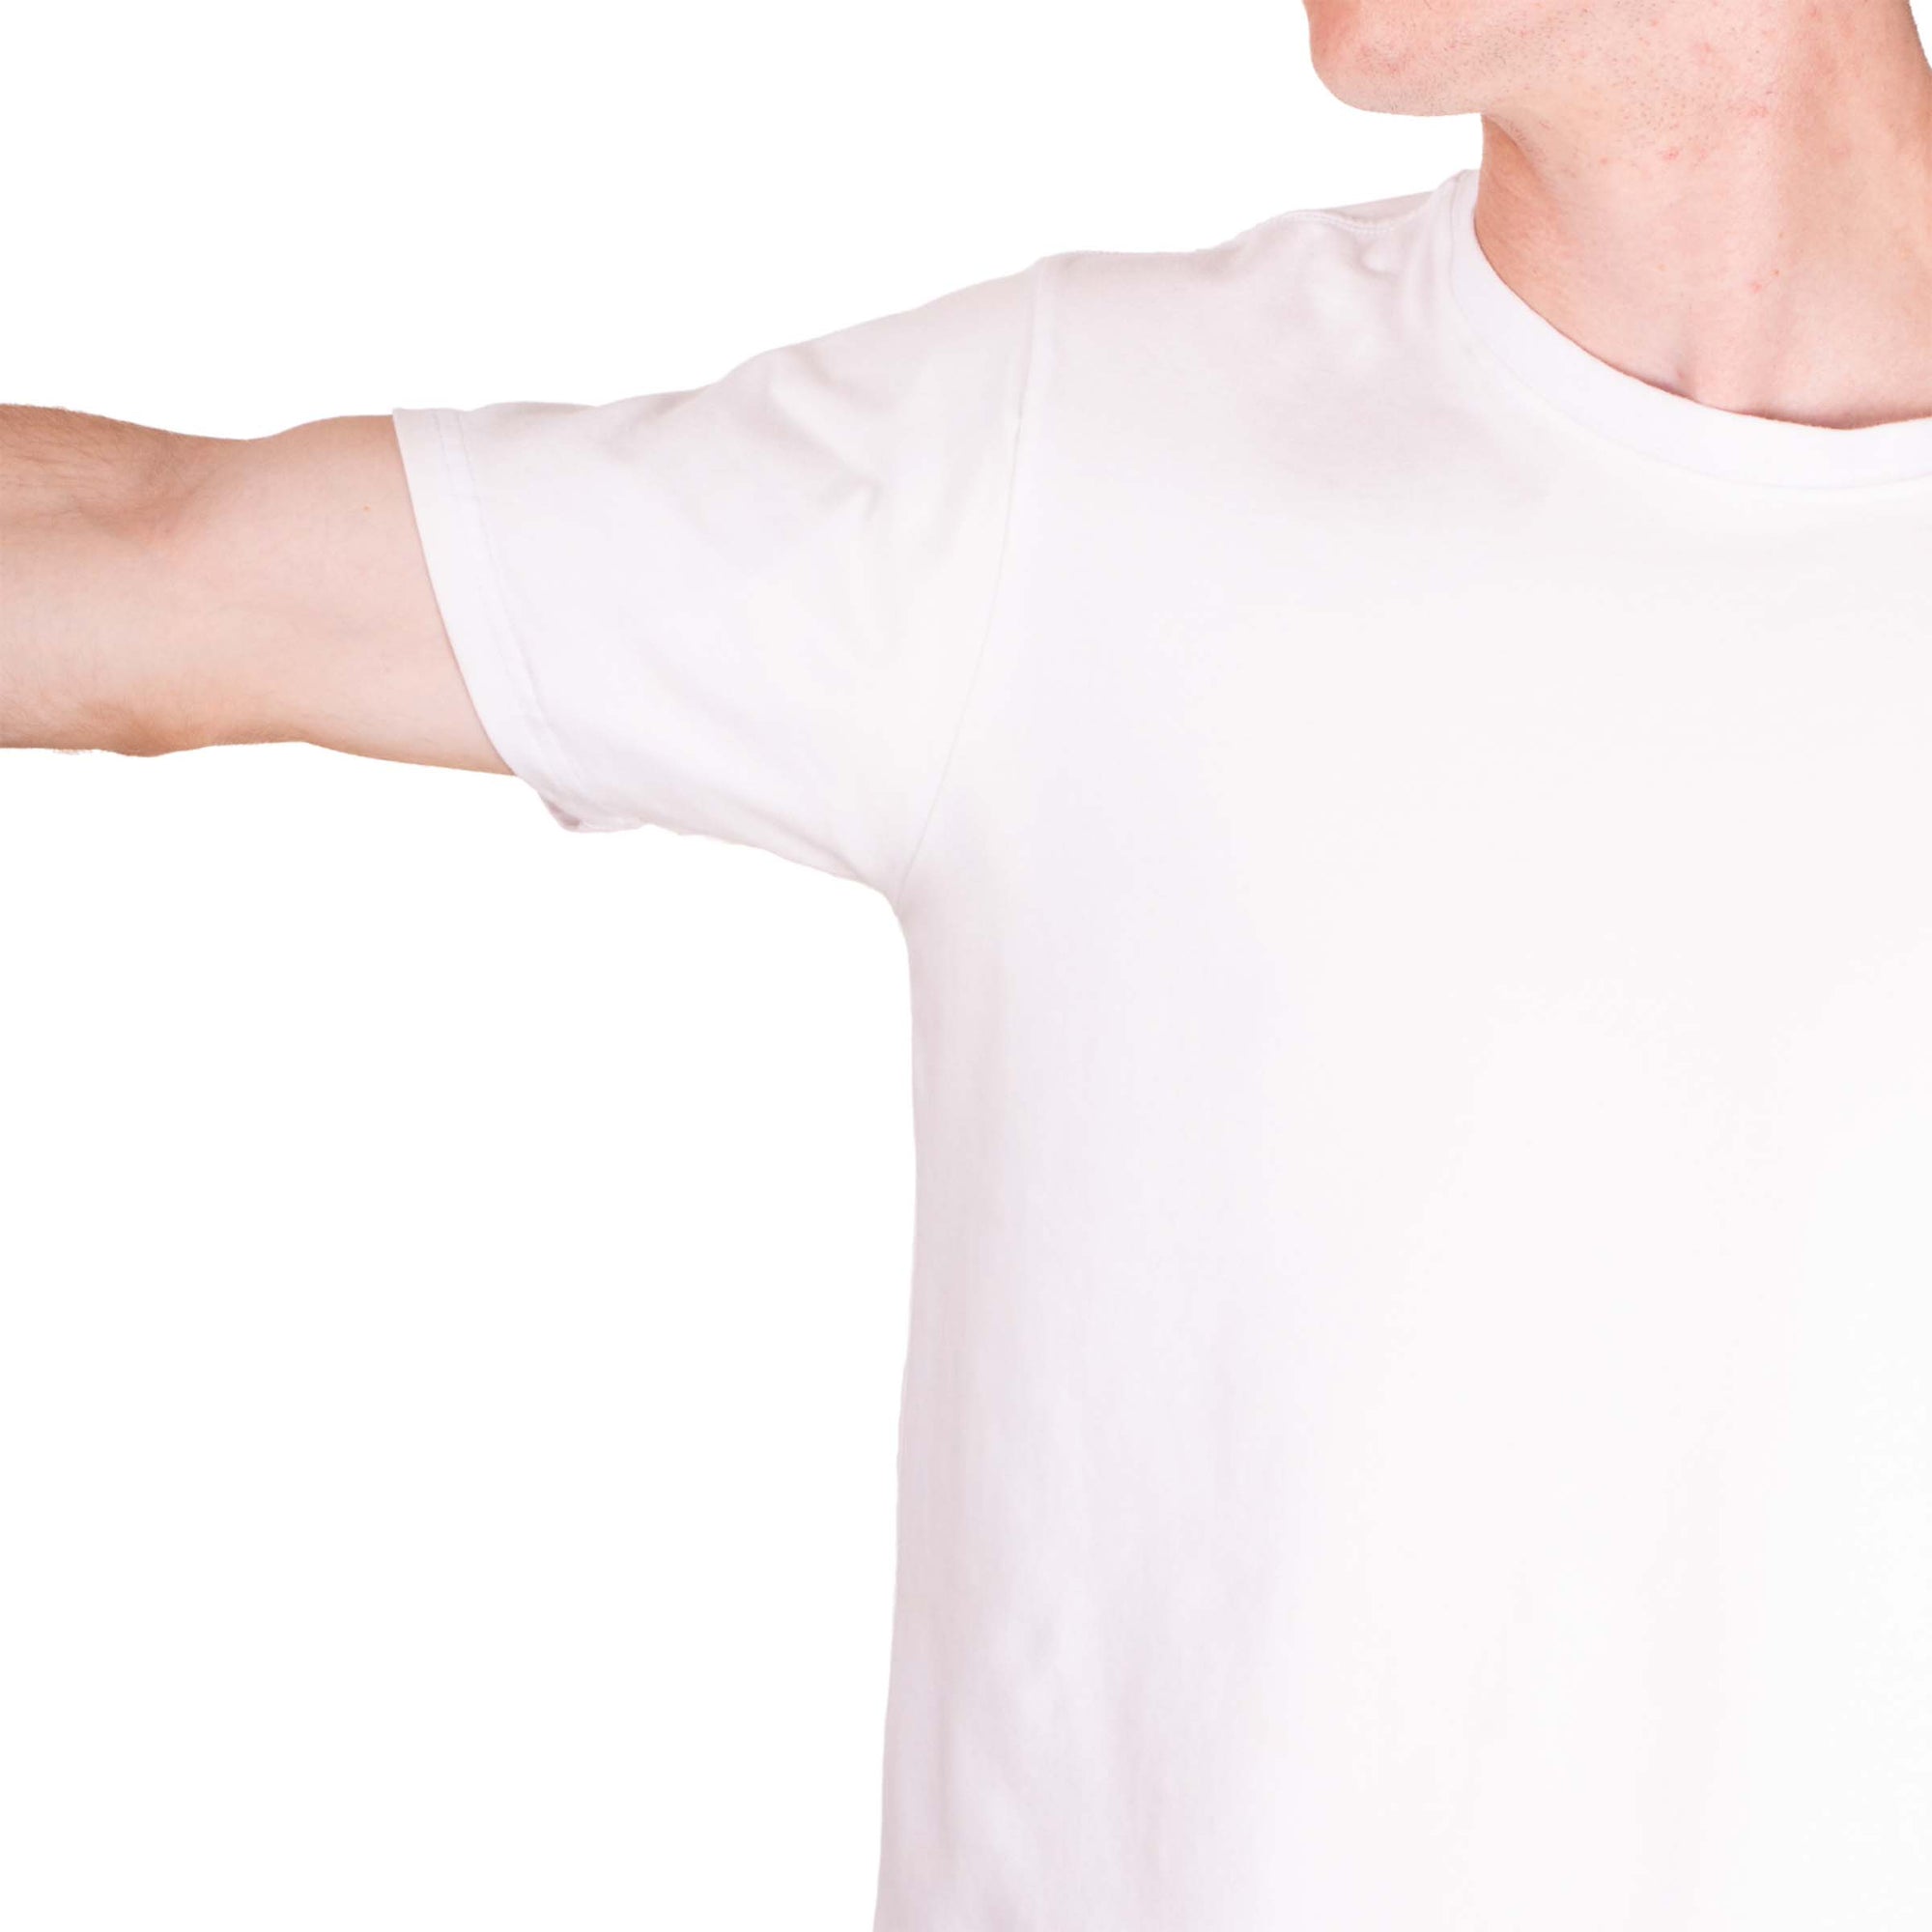 Underarm white t-shirt for sweat stains